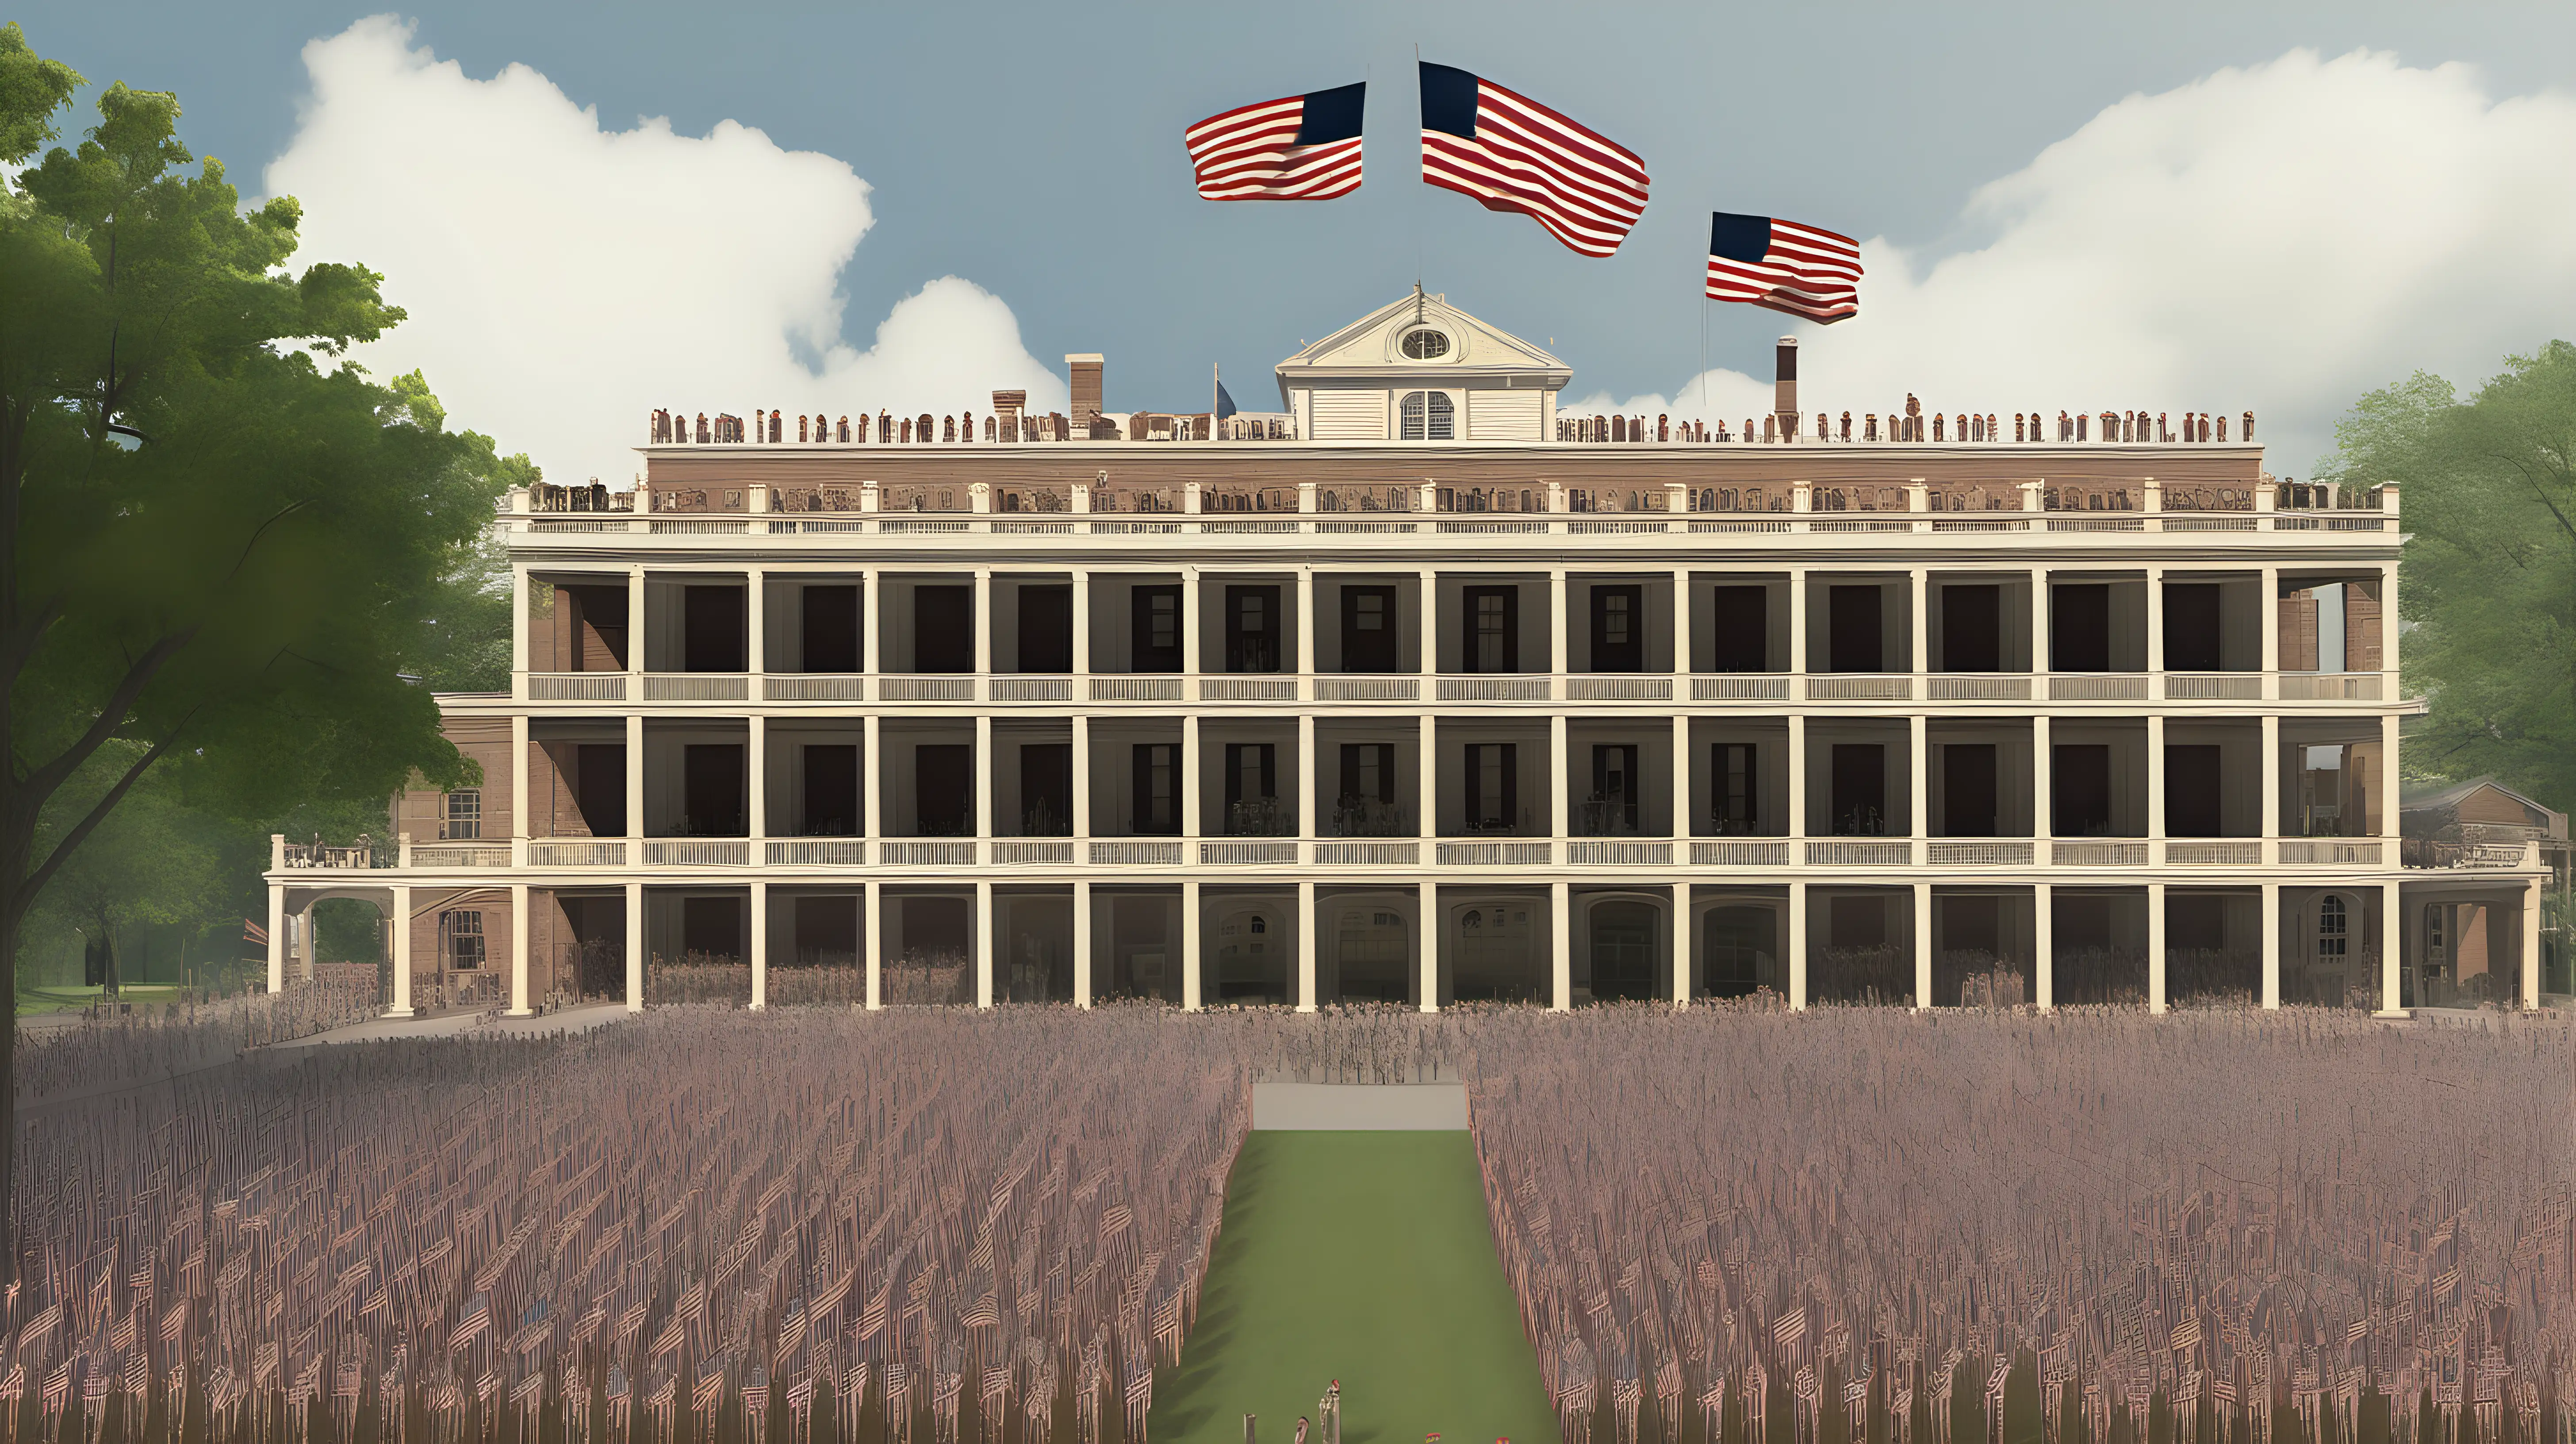 "Generate a visual representation of a historical site hosting a special reenactment or event to commemorate Independence Day."